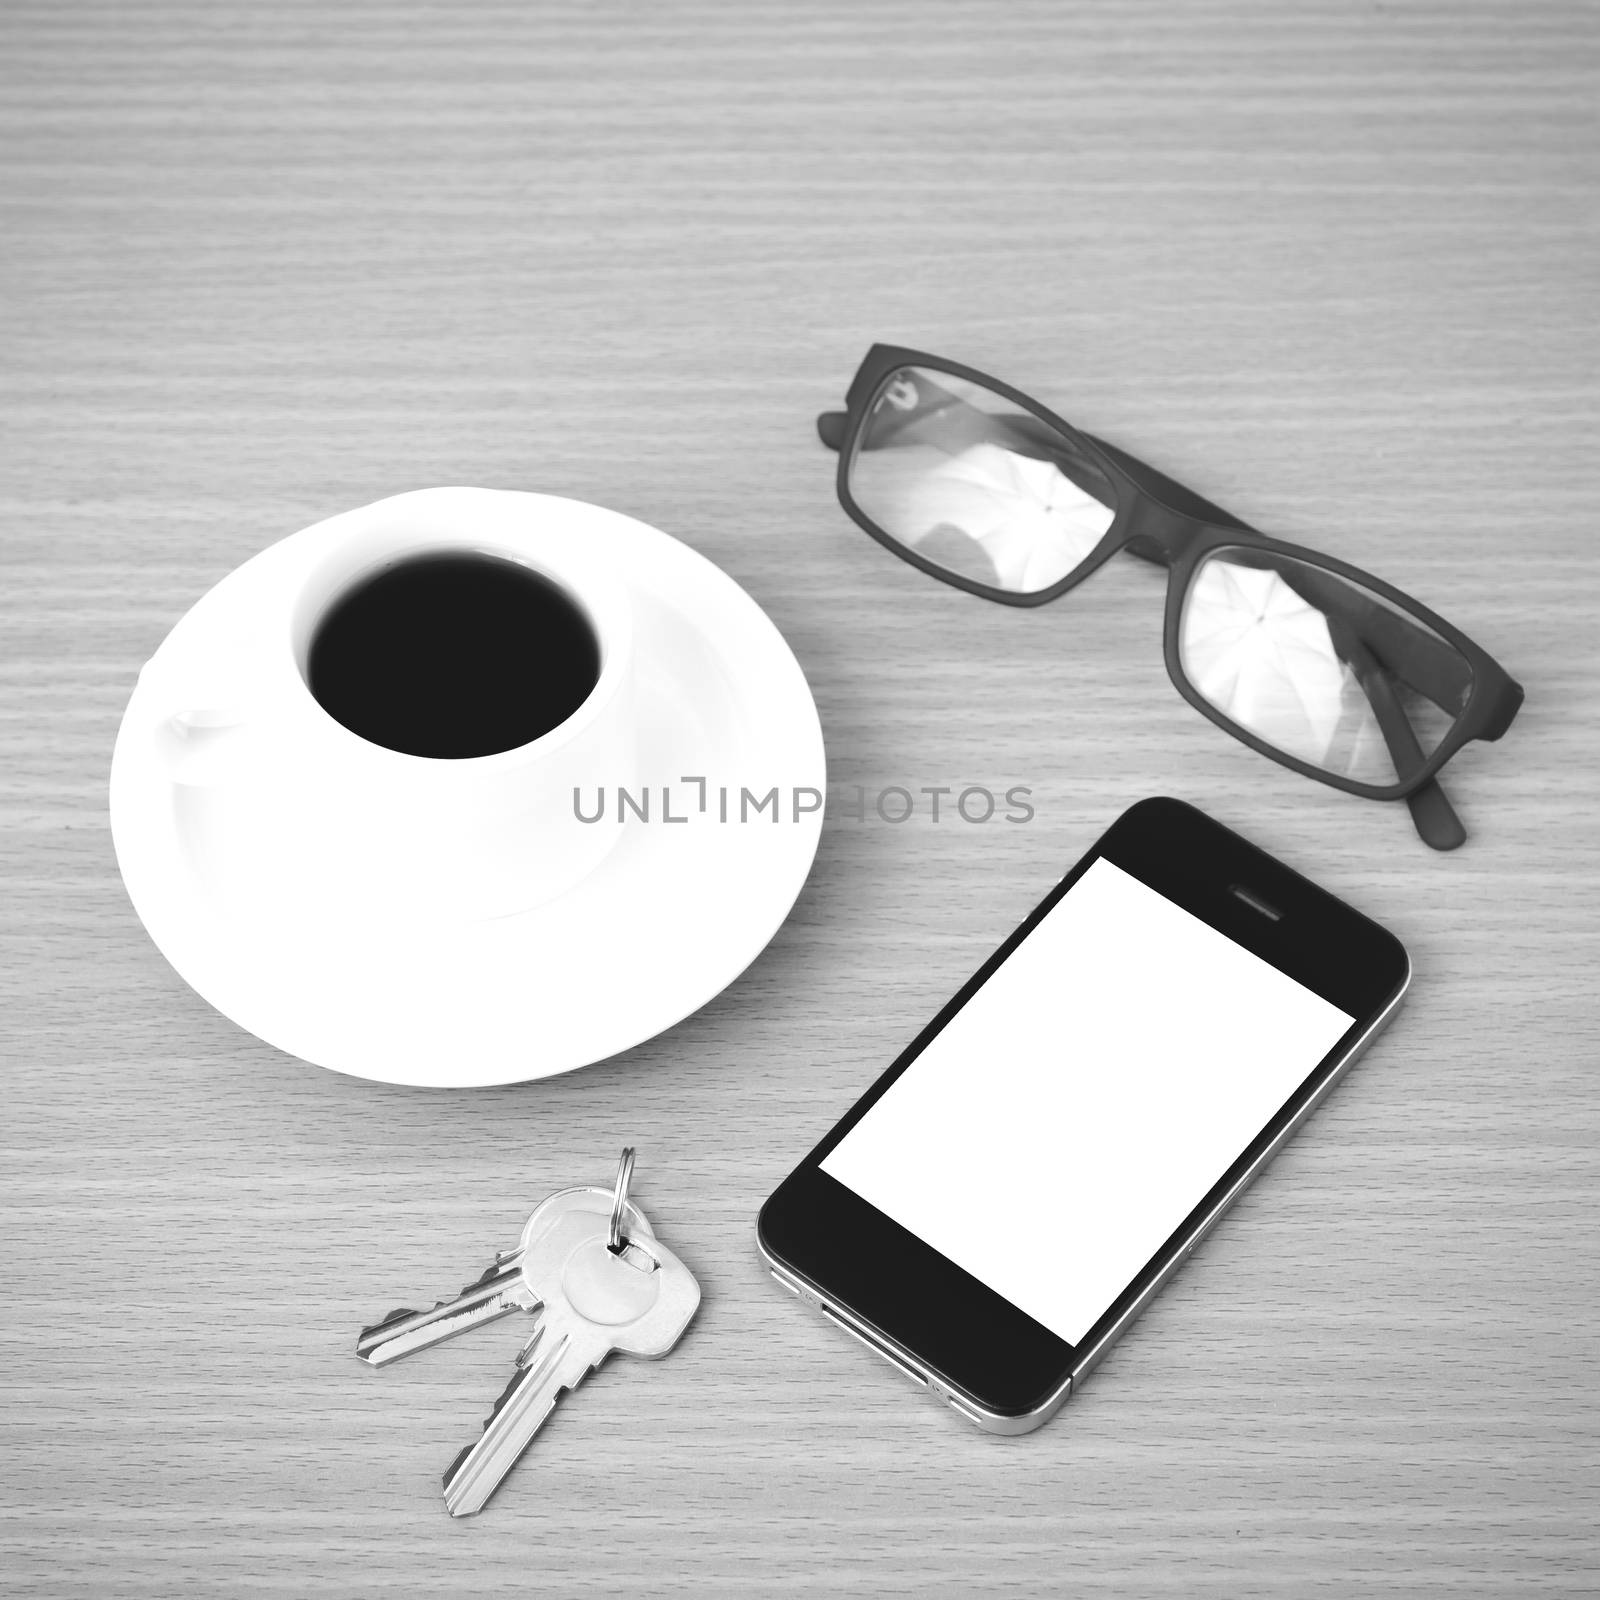 coffee cup and phone with key on wood background black and white color